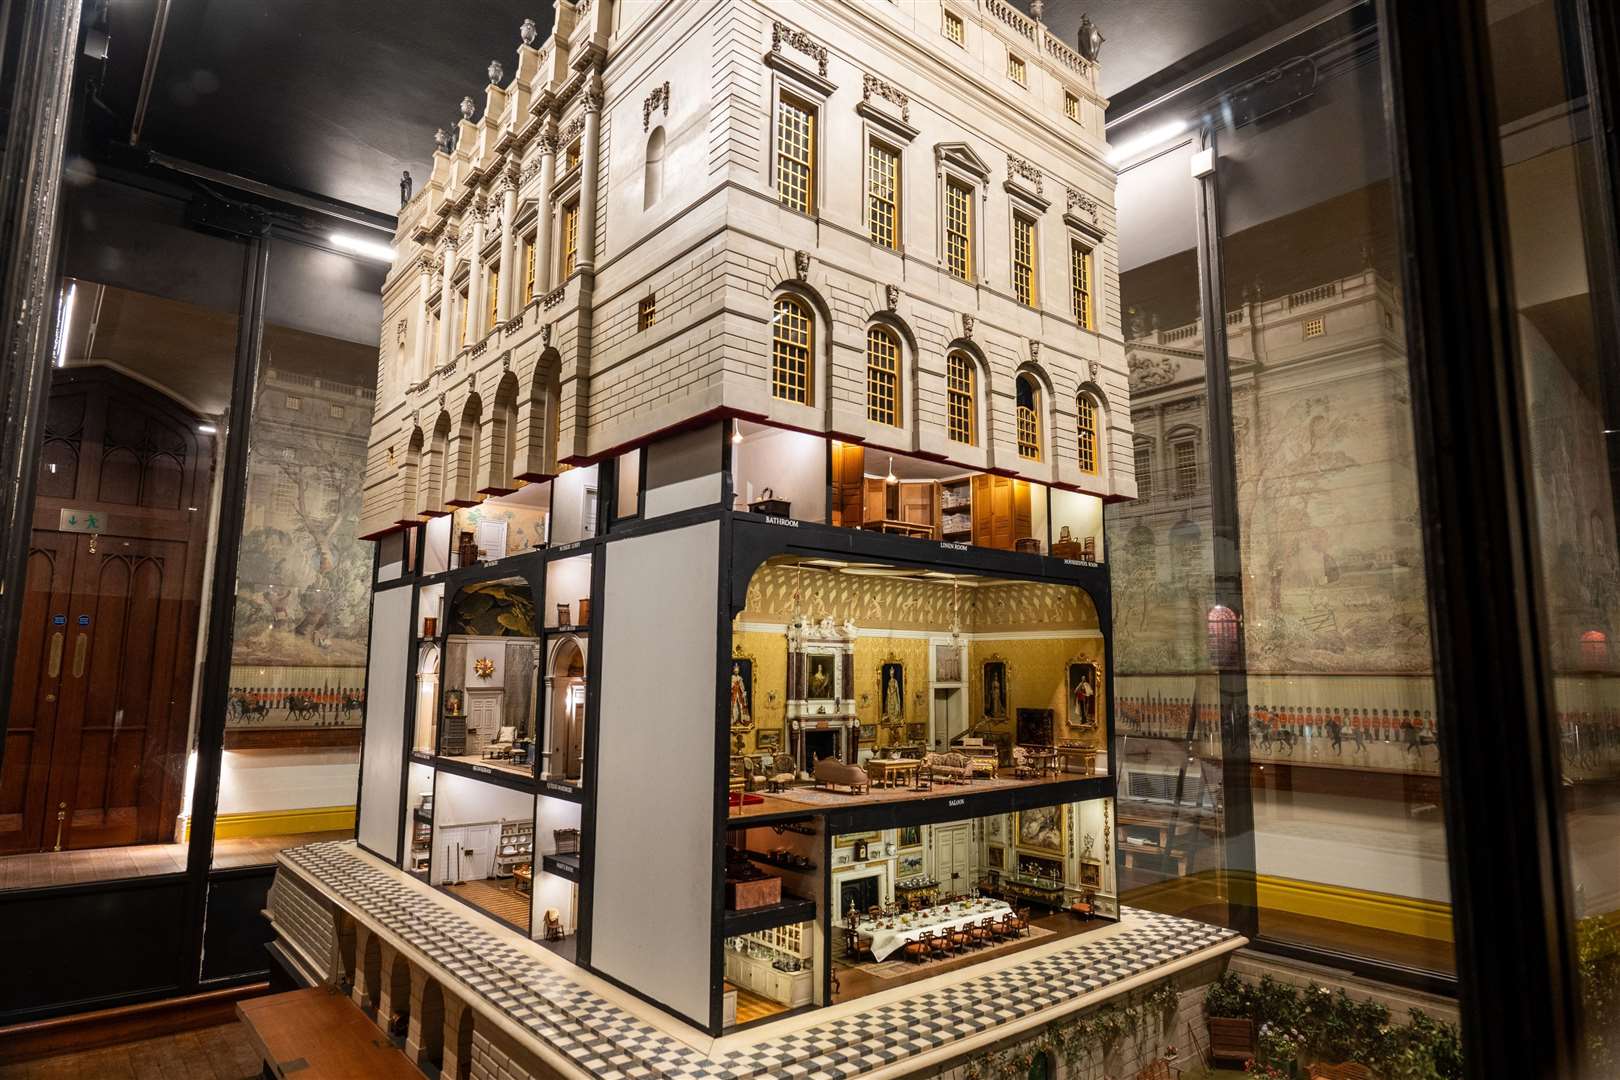 Queen Mary’s Dolls’ House on show at Windsor Castle (King Charles III/Royal Collection Trust/PA)